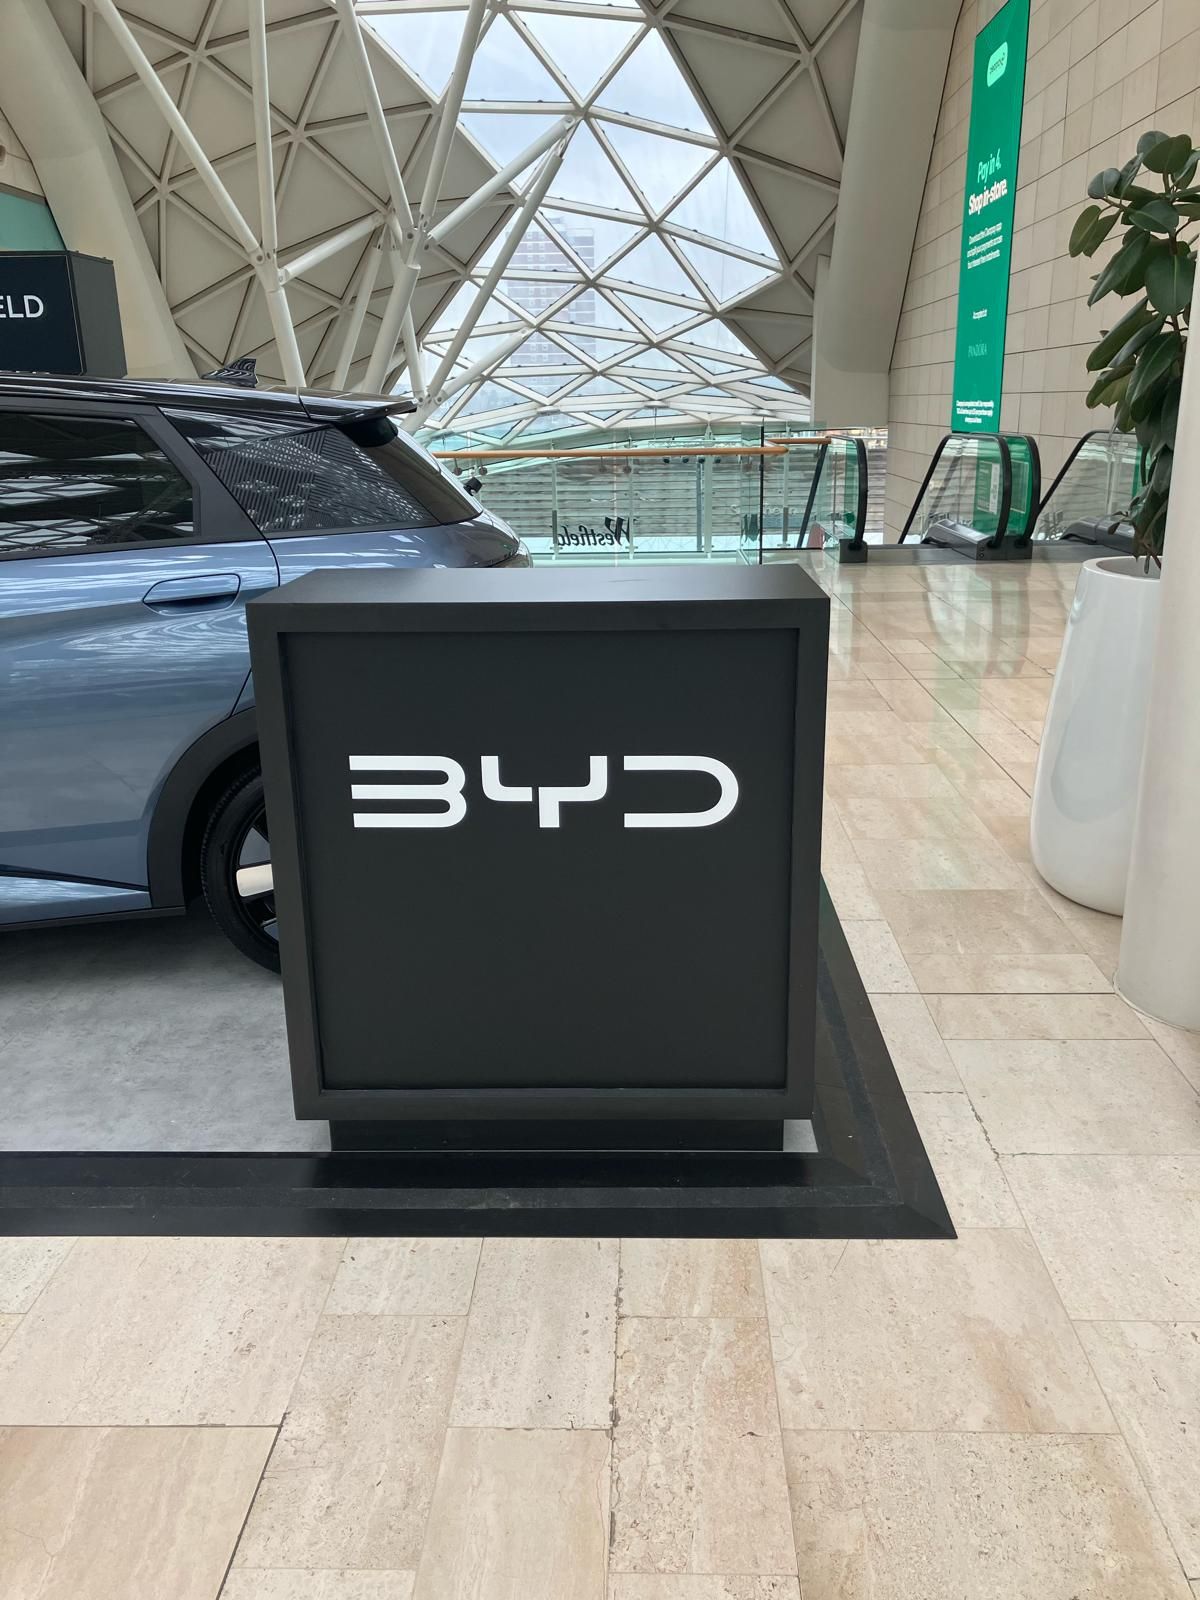 Team BYD West London pops up in Westfield London and offers a preview before the new dealership opens its doors.